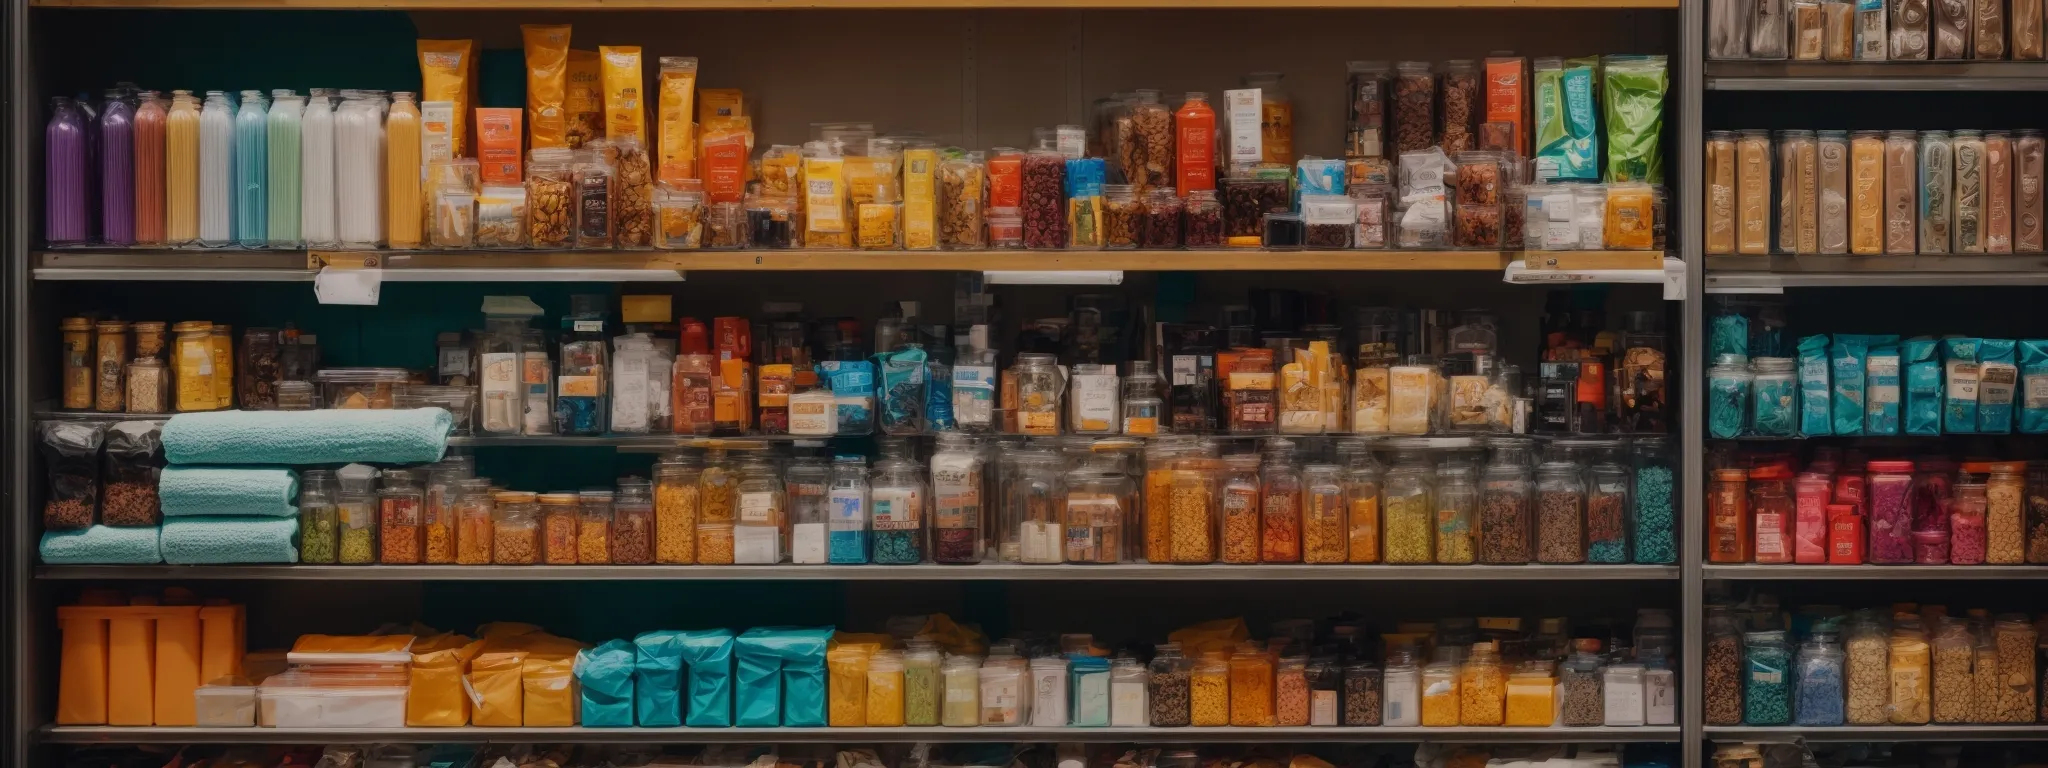 a neatly organized shop shelf displaying a variety of colorful products, all available for online purchase.